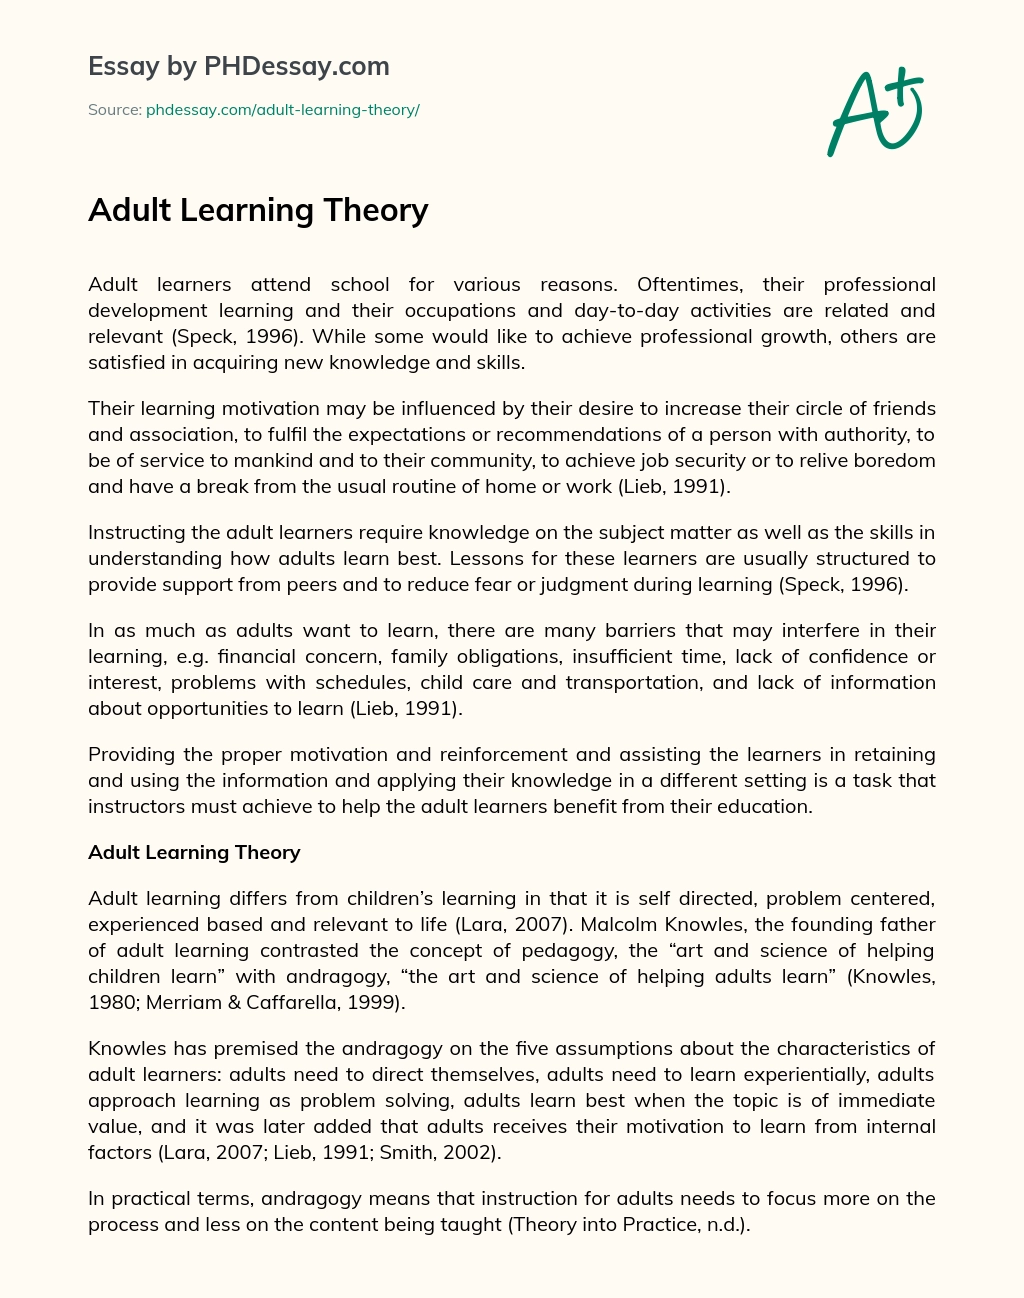 Adult Learning Theory essay